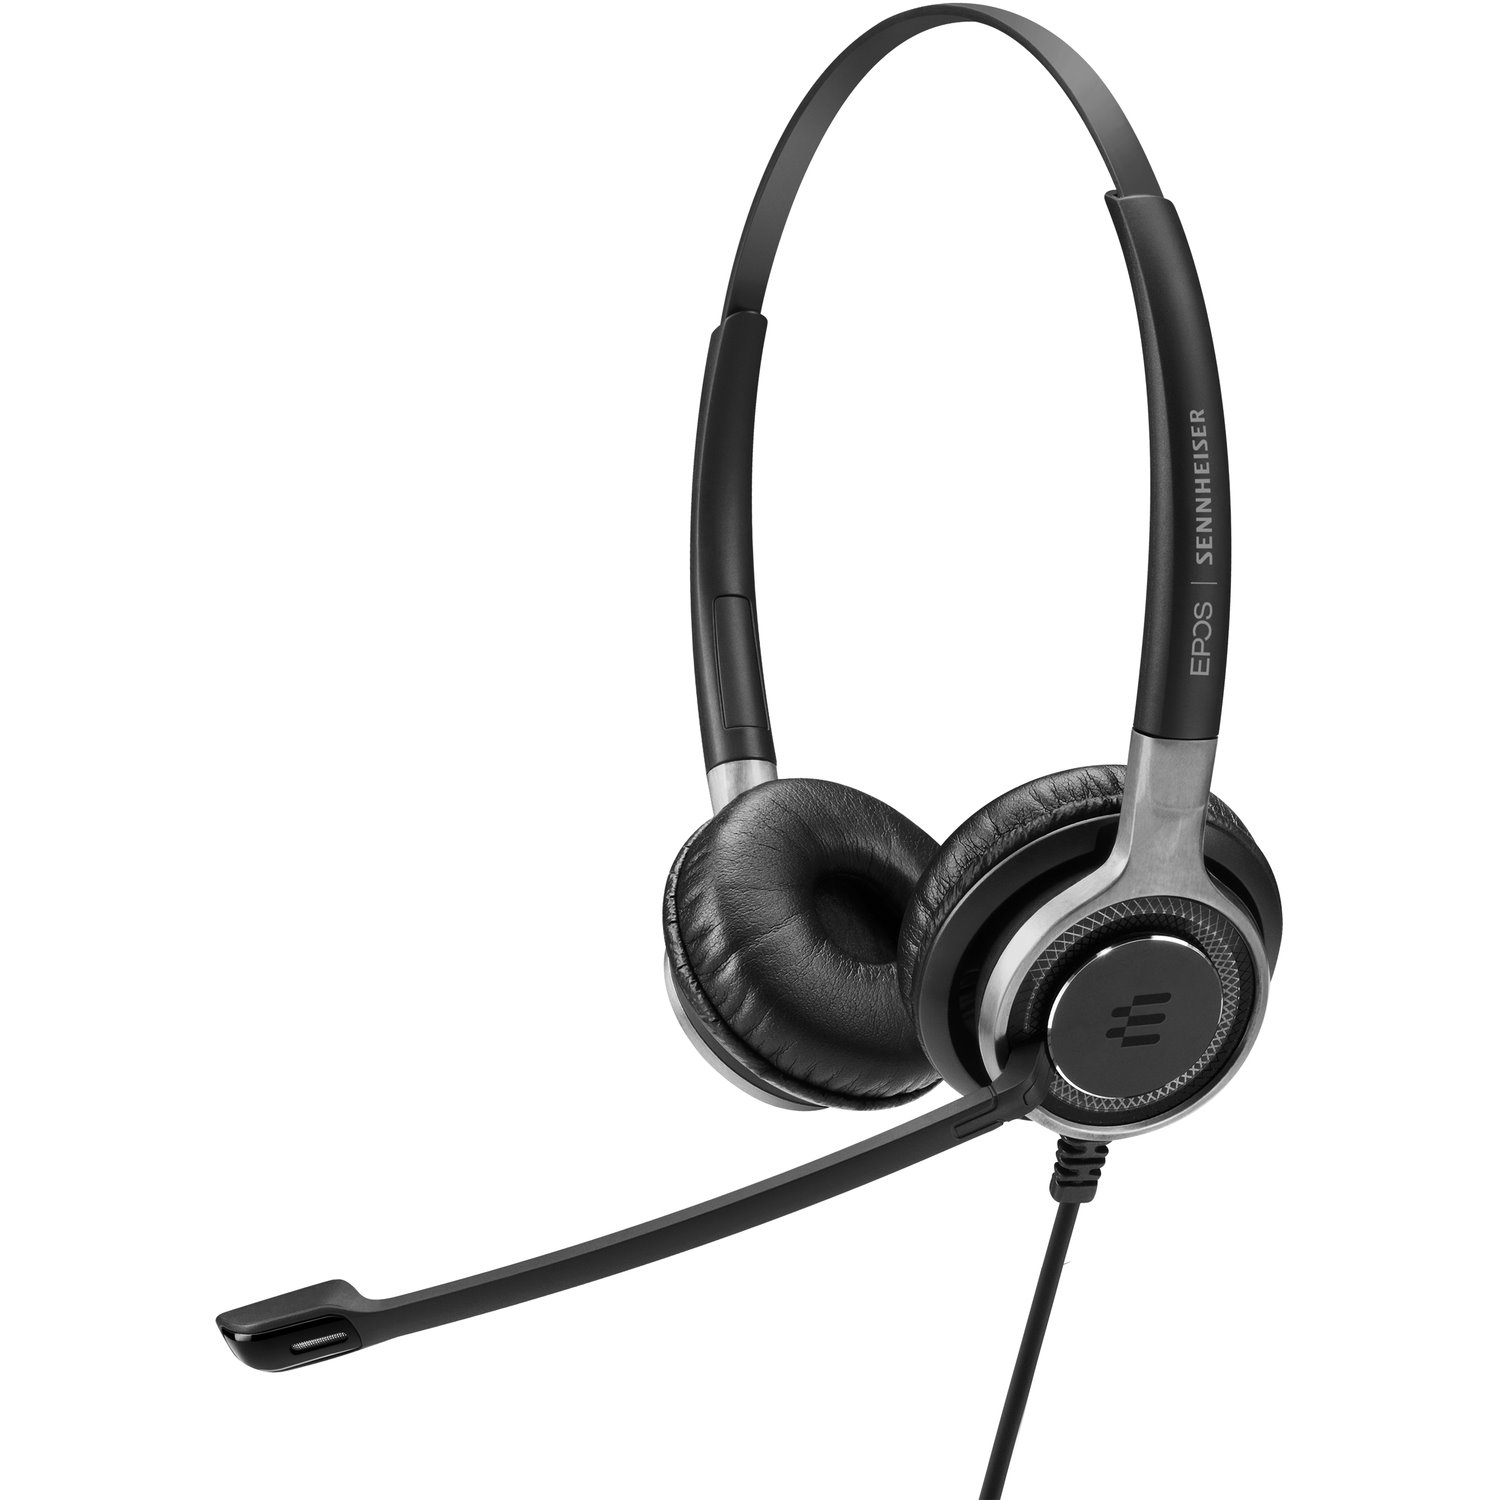 EPOS IMPACT SC 665 Wired On-ear Stereo Headset - Silver, Black